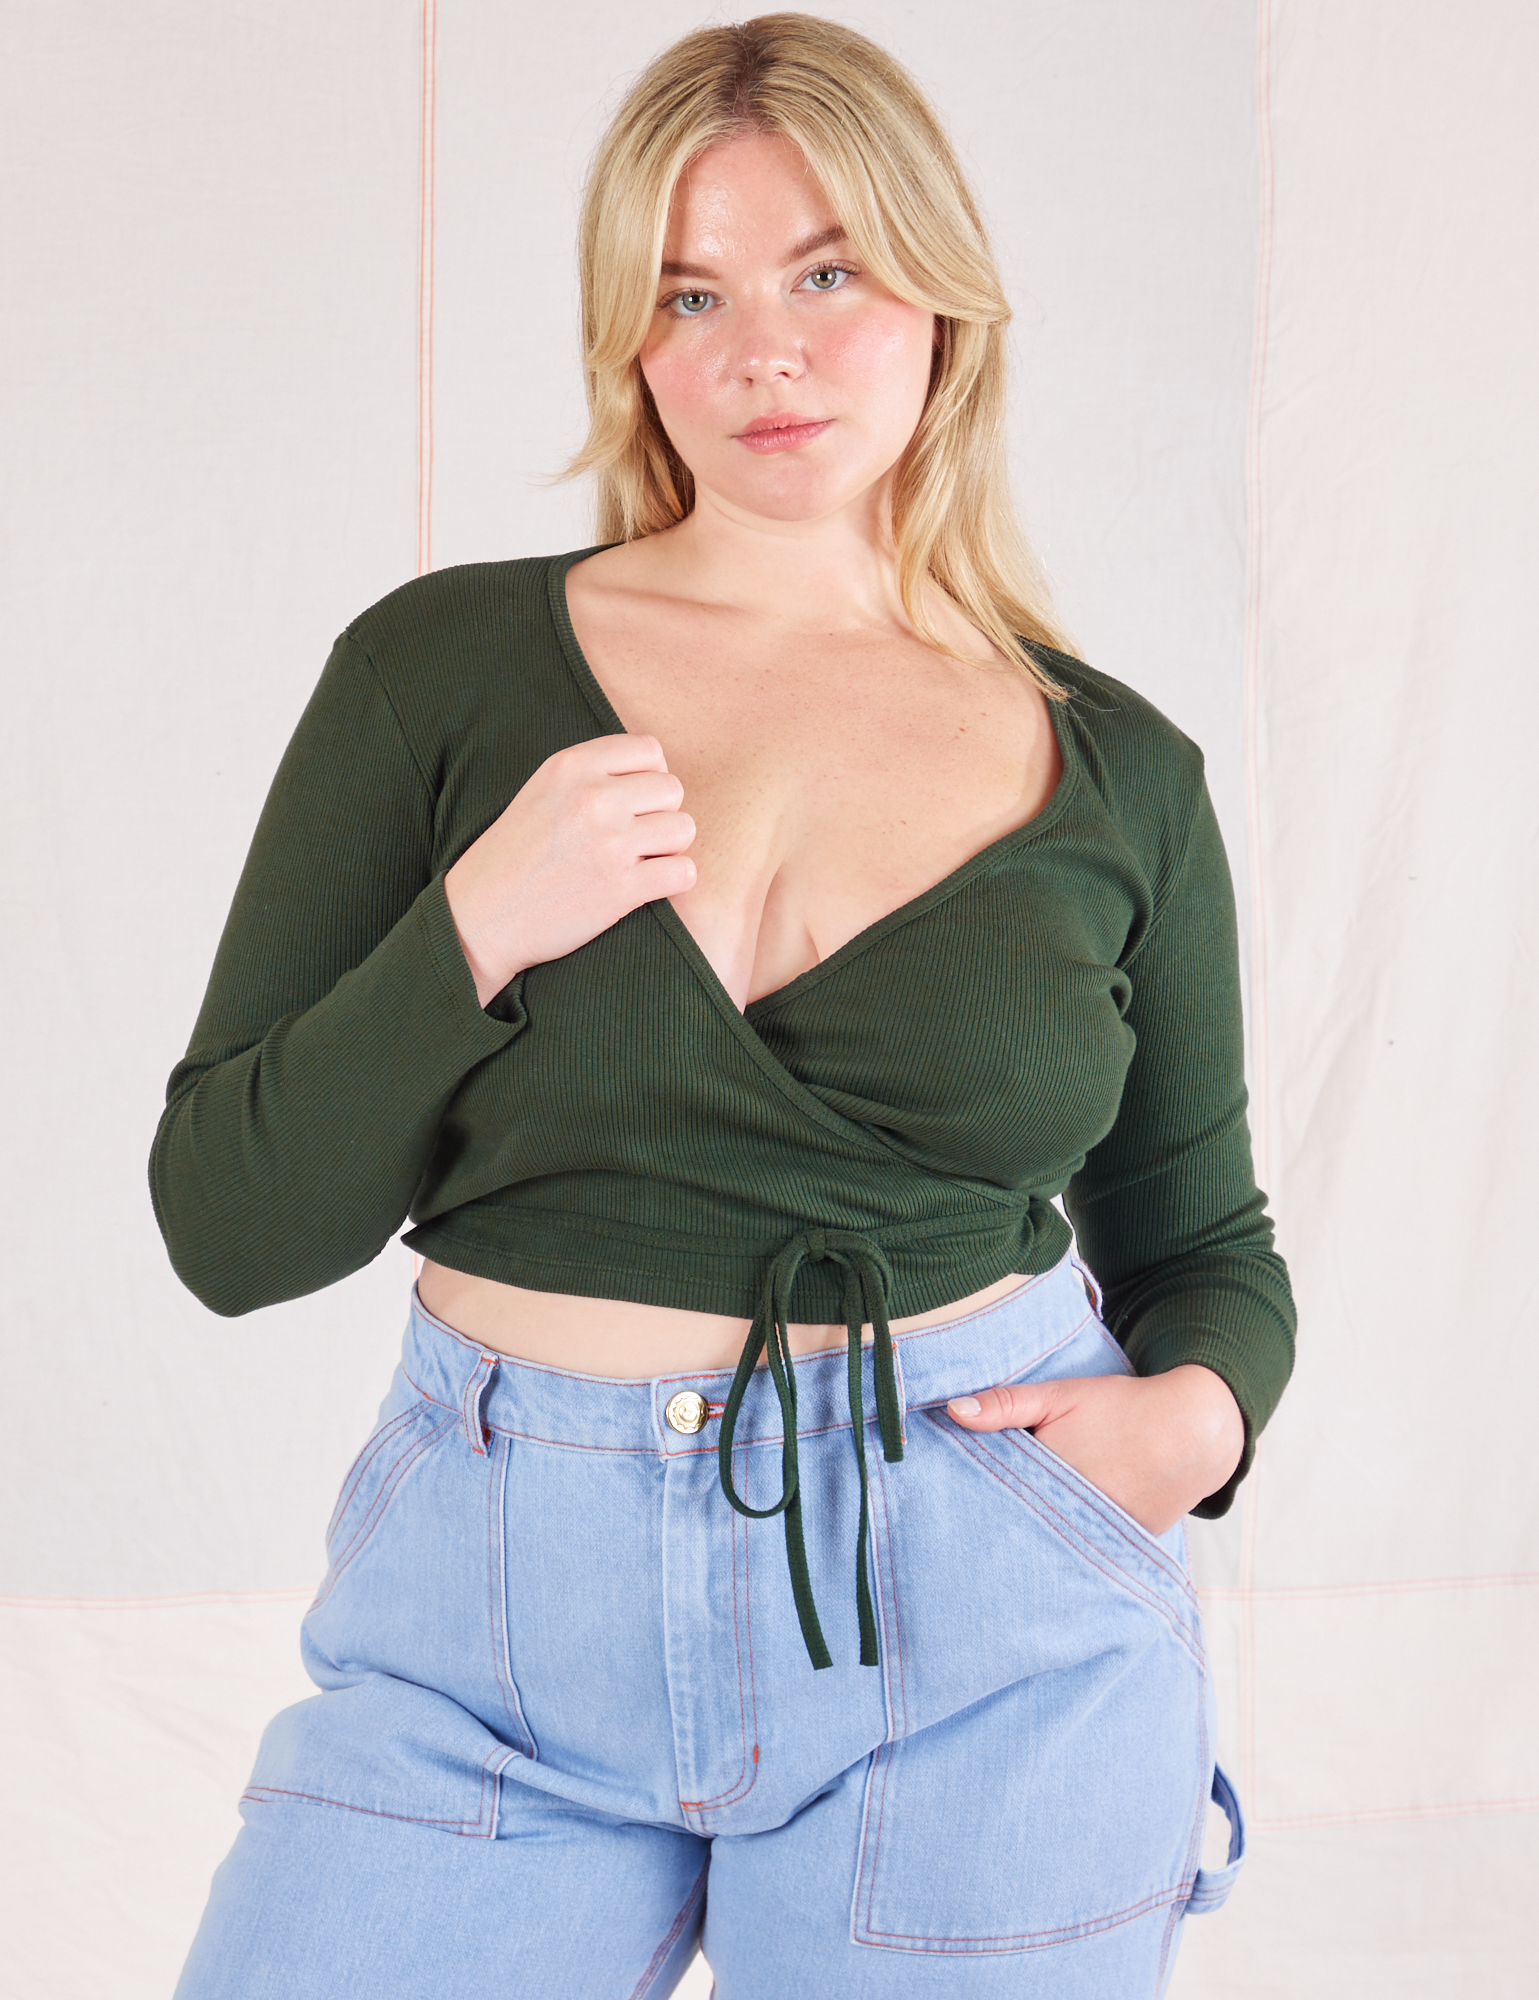 Lish is 5&#39;8&quot; and wearing size 3 Wrap Top in Swamp Green